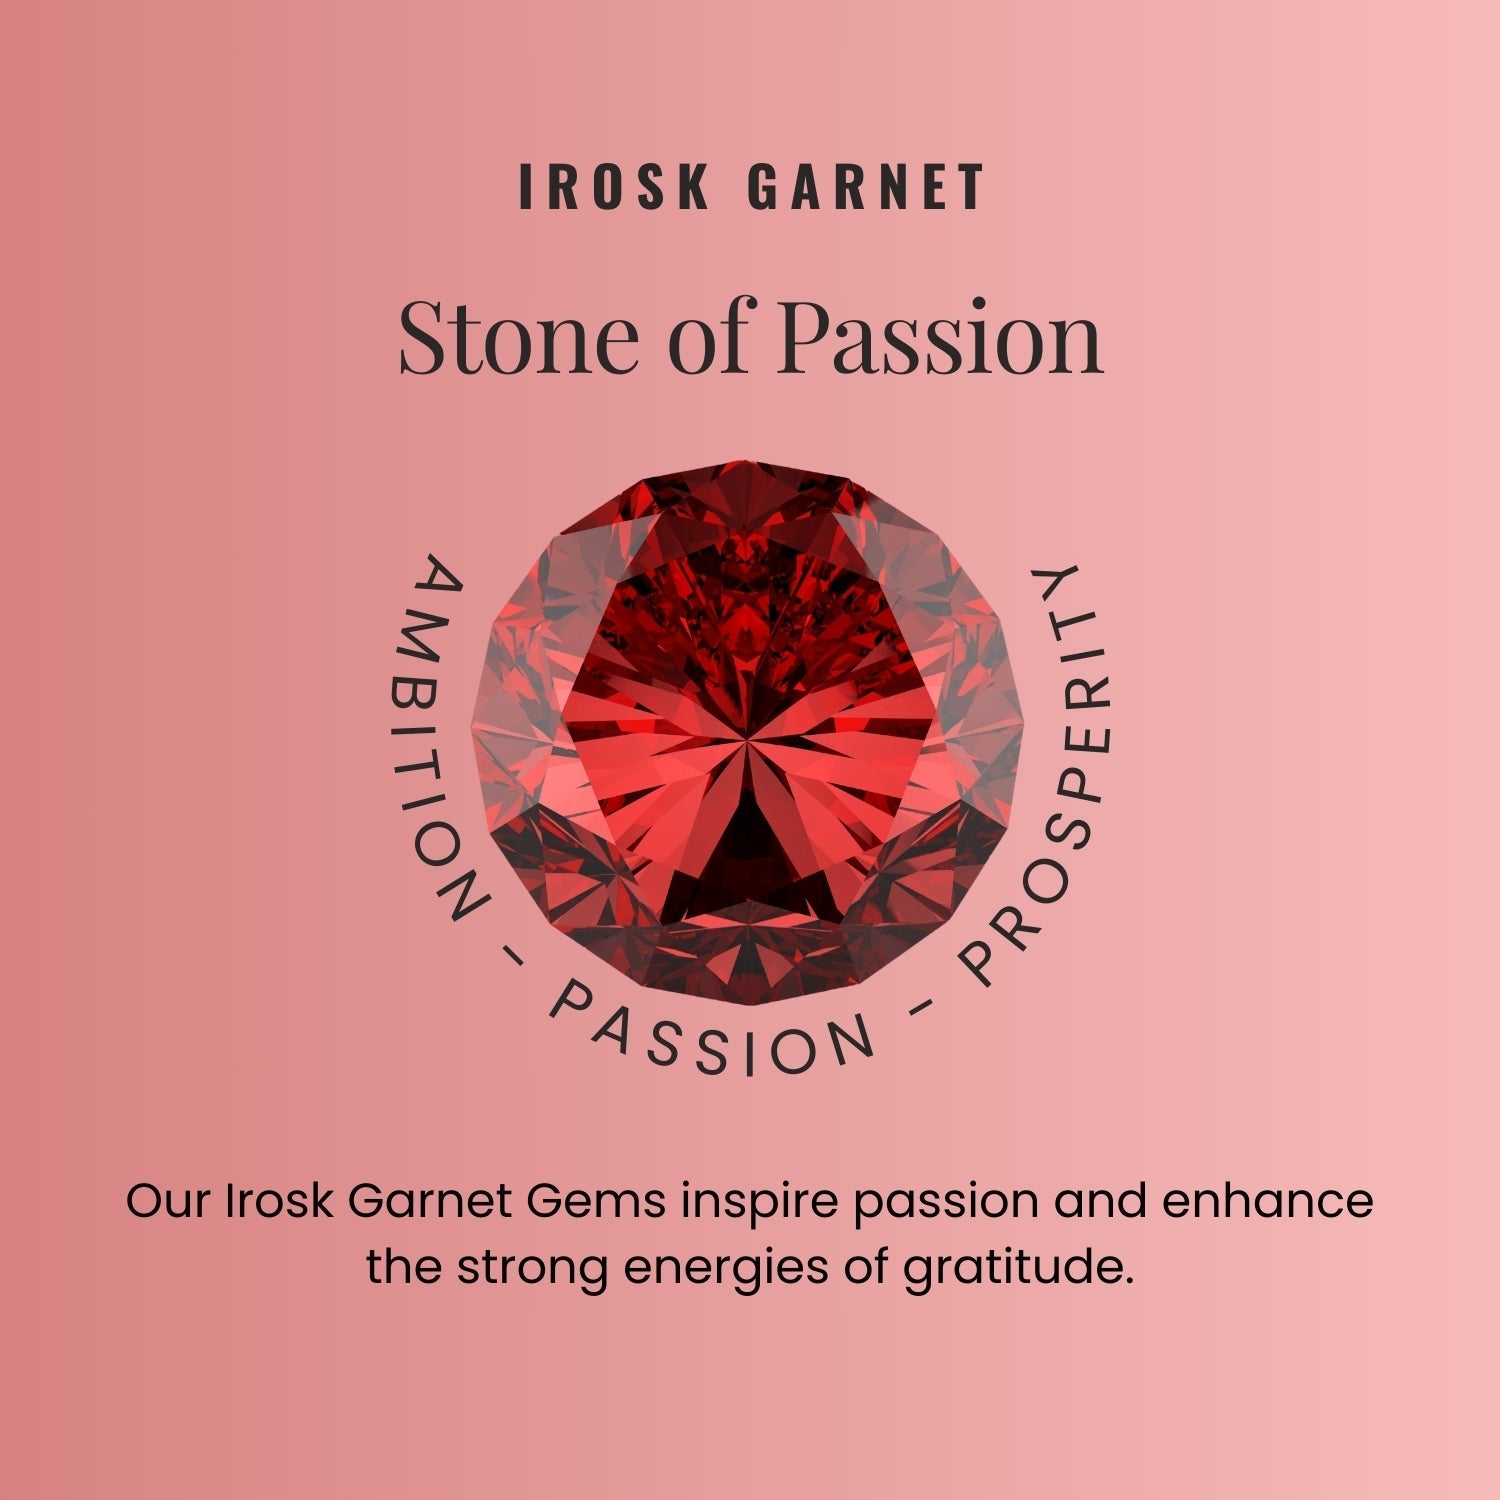 photo describing properties of garnet,ambition,passion and prosperity